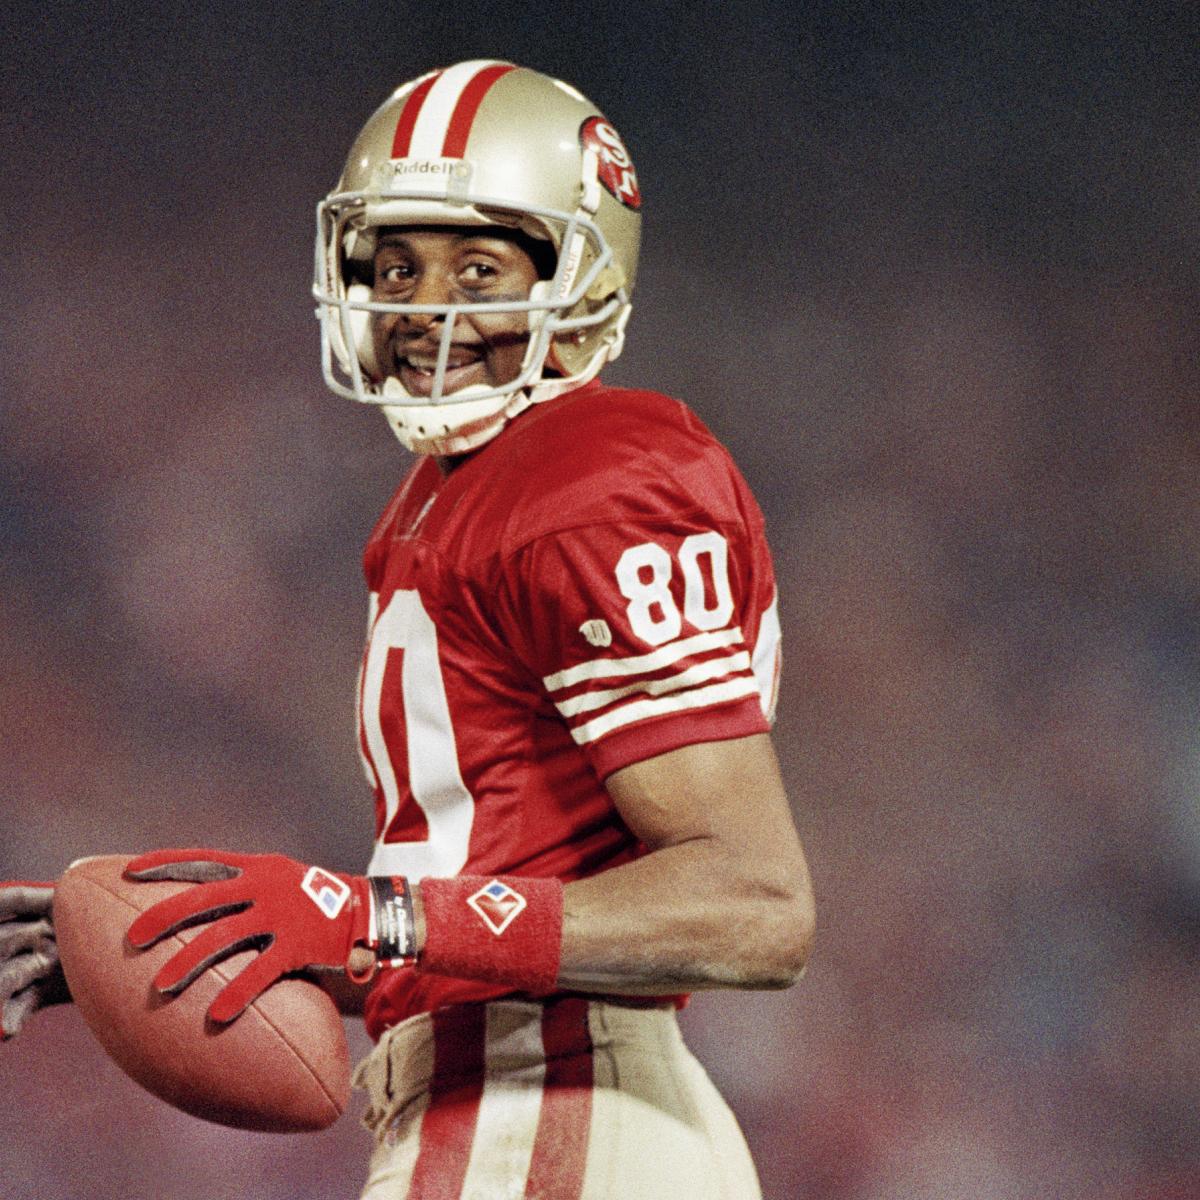 The Top 10 NFL Wide Receivers of All Time